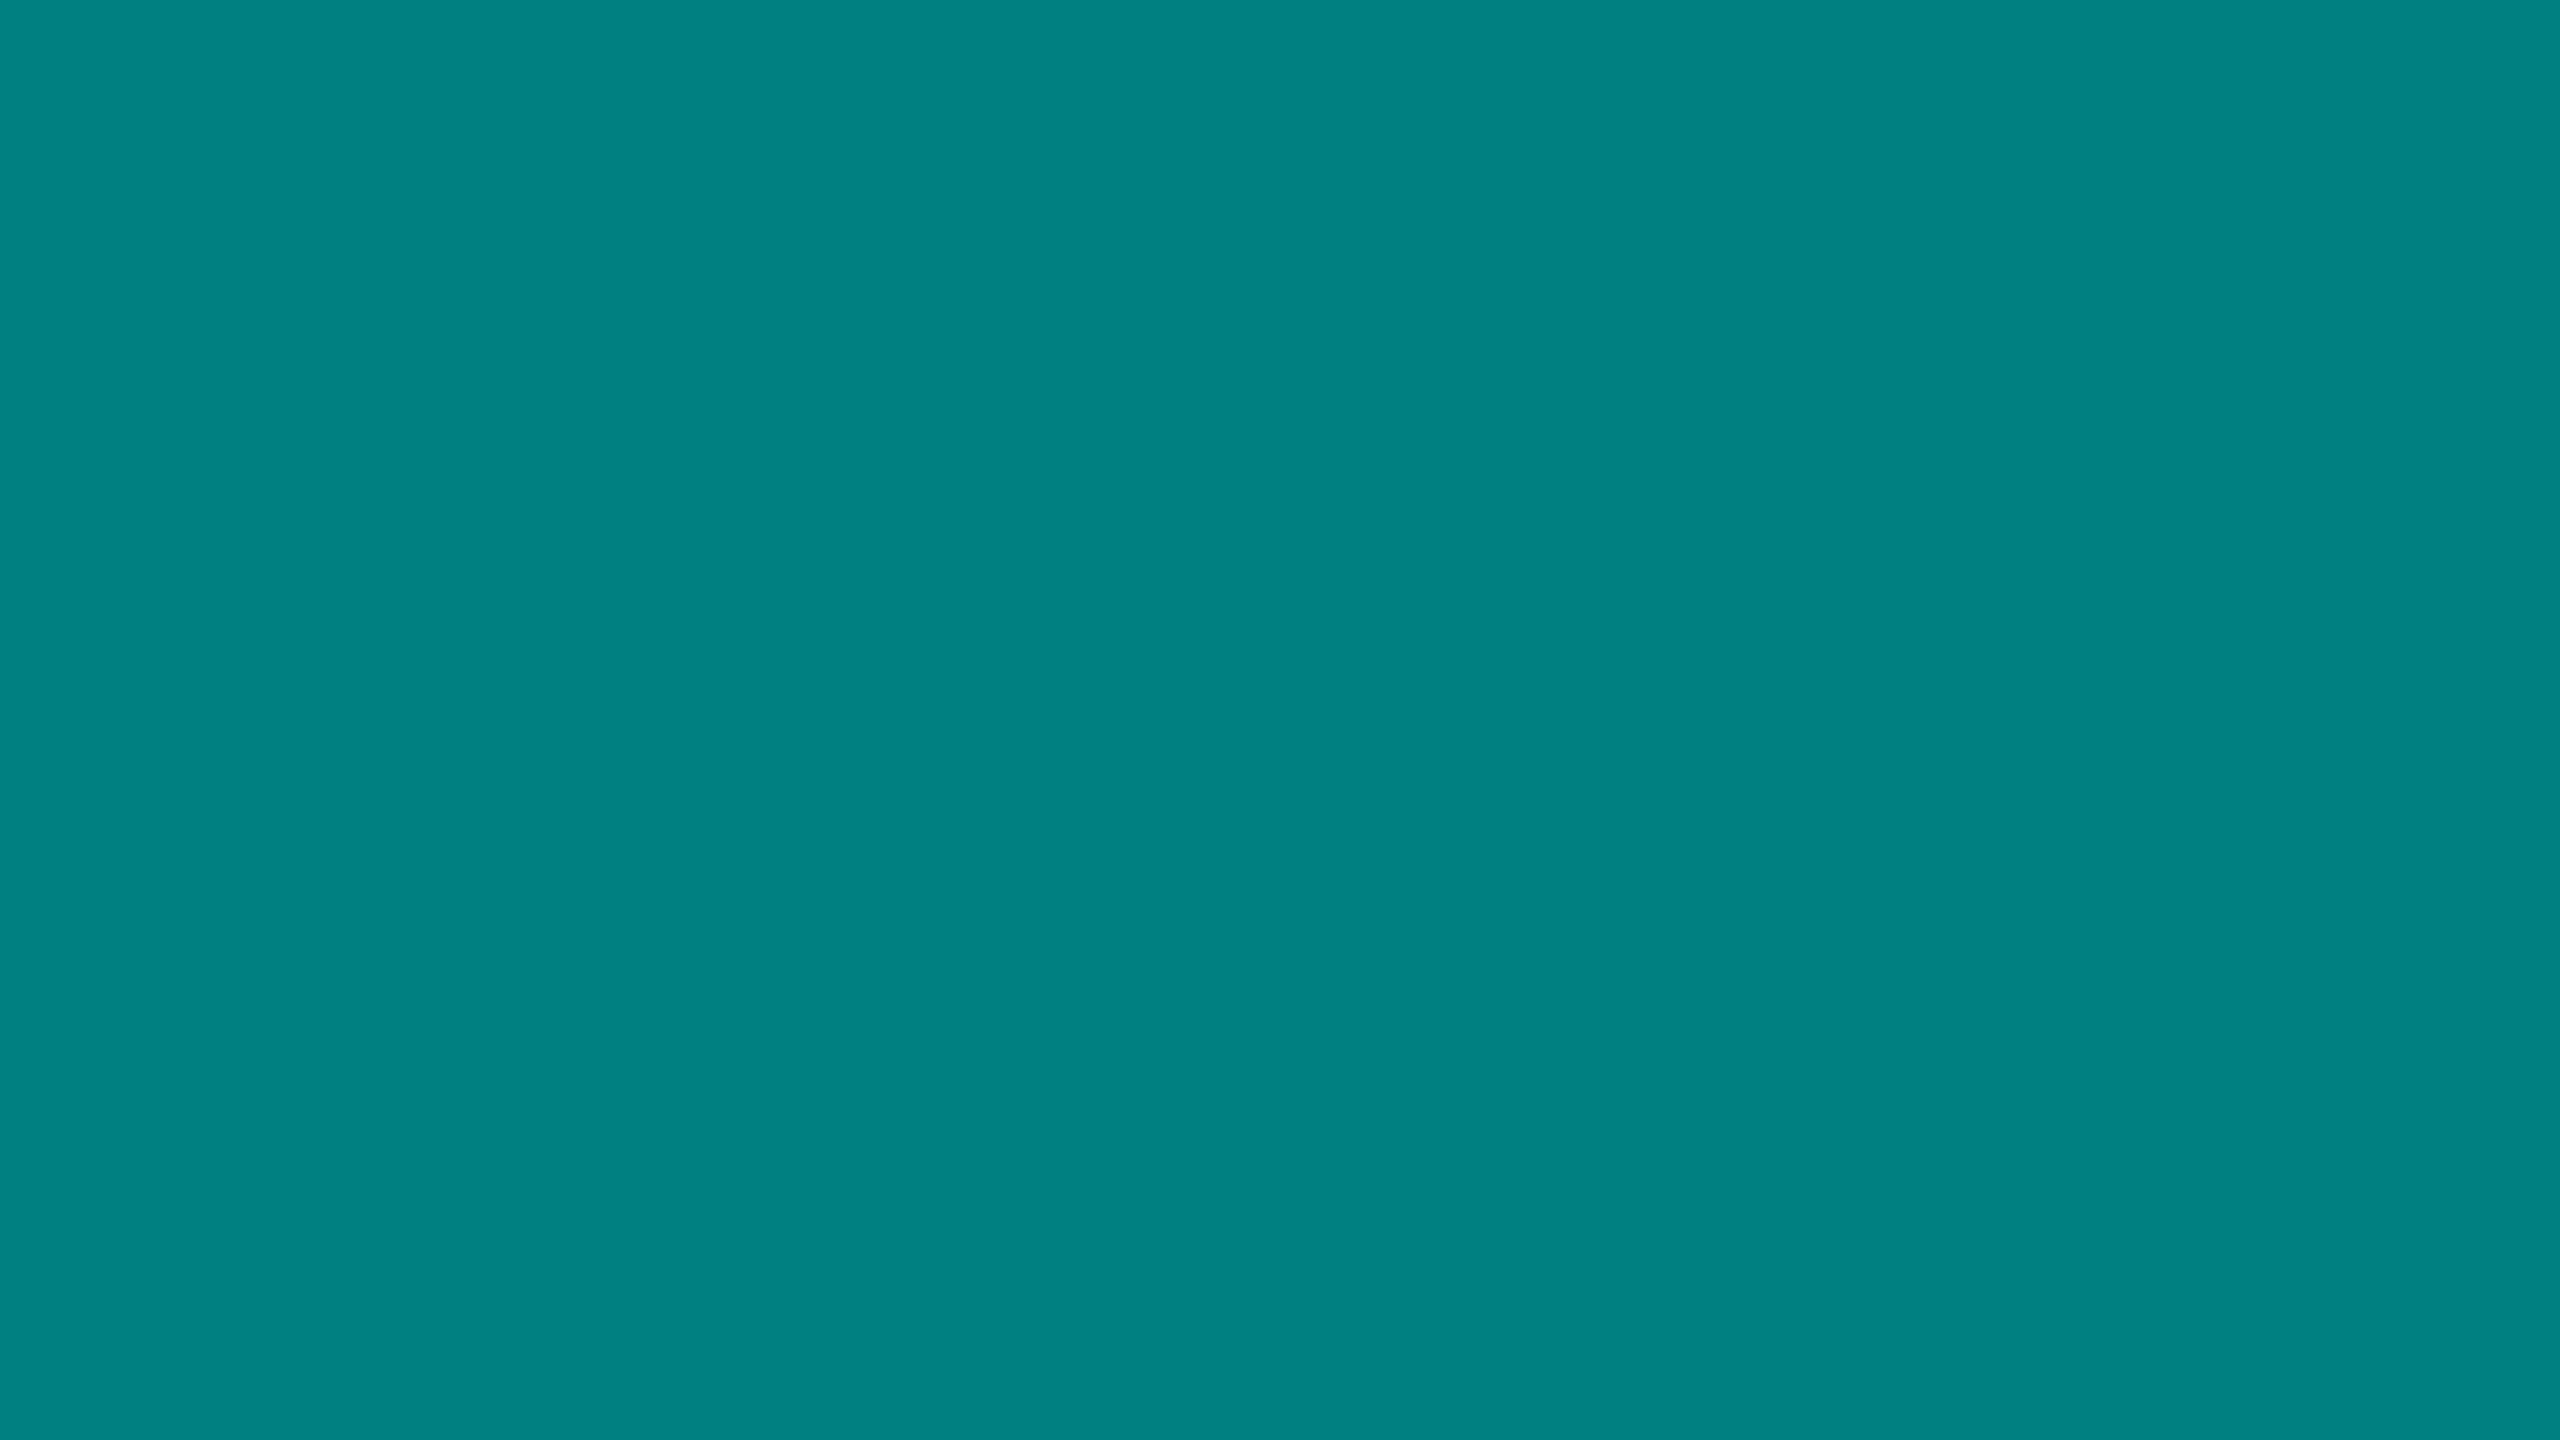 The Color Teal 3